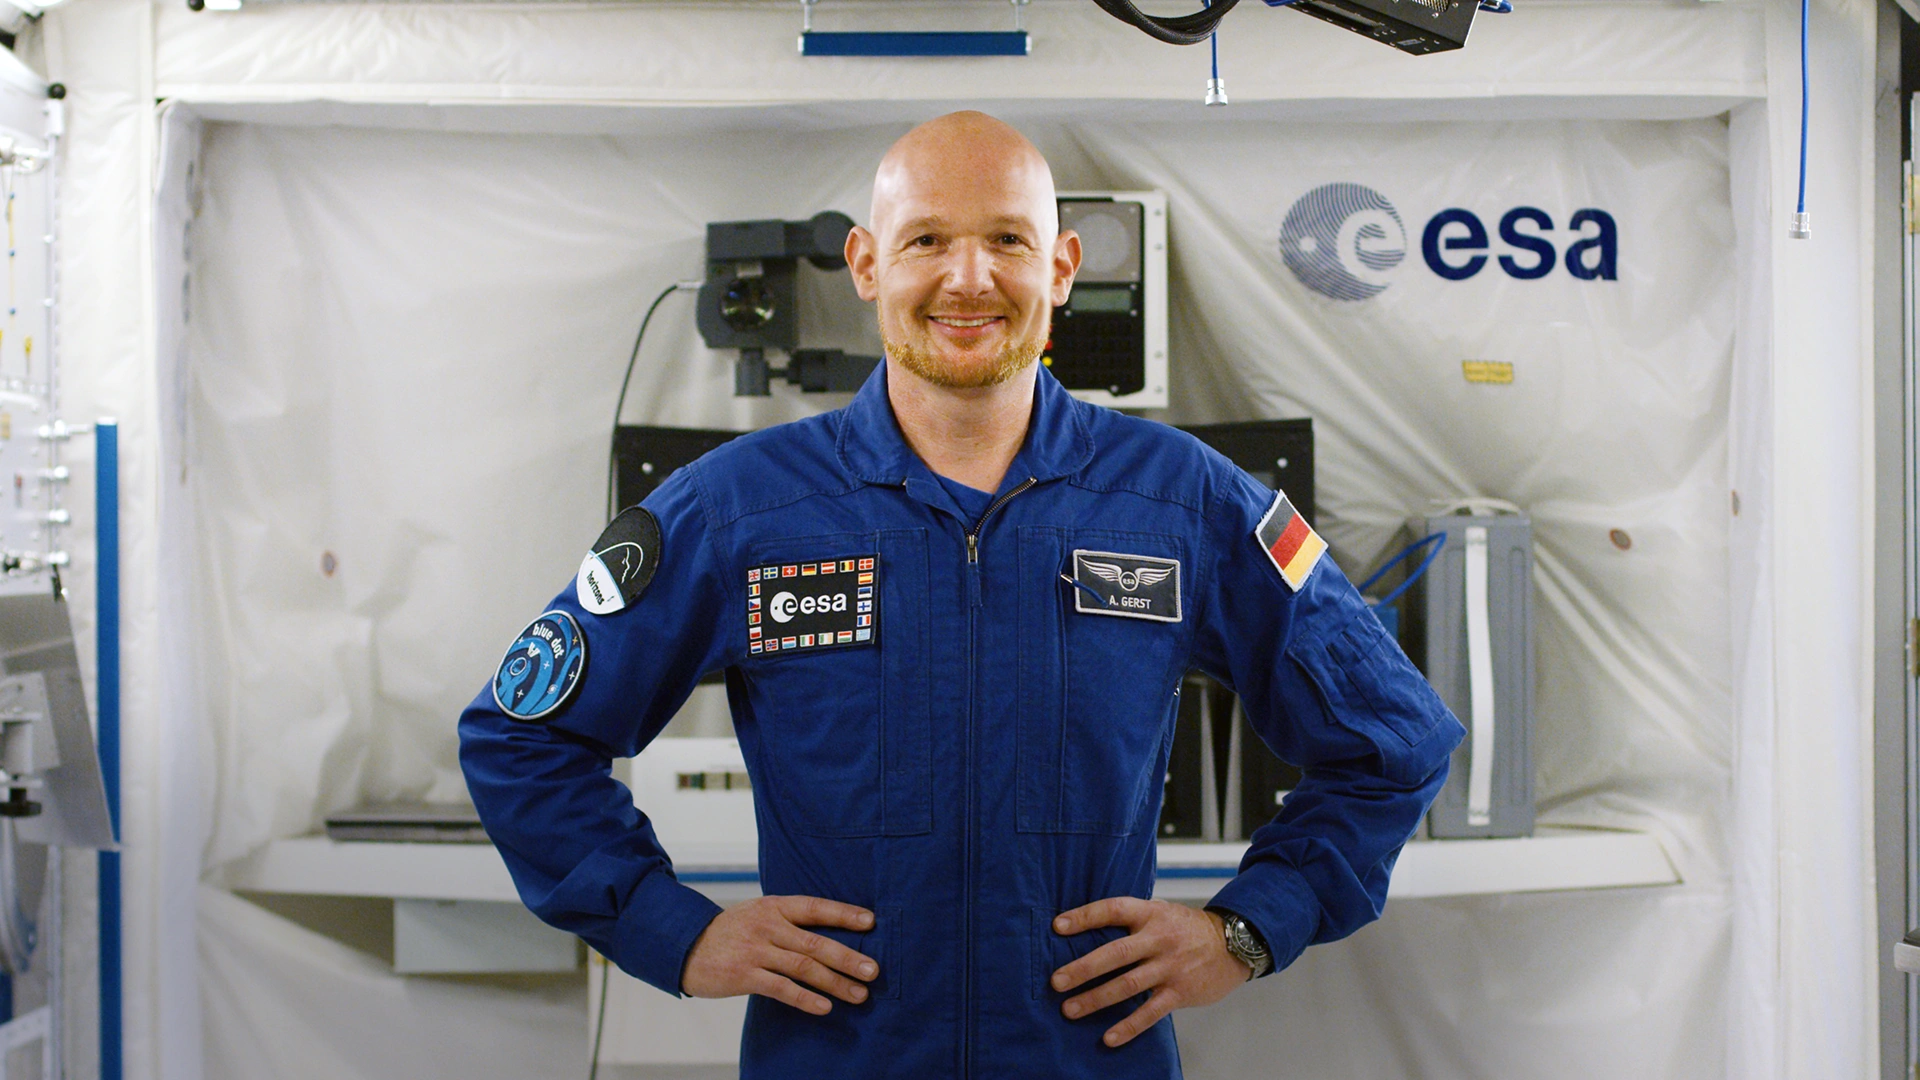 A picture shows Alexander Gerst, astronaut at the anniversary 